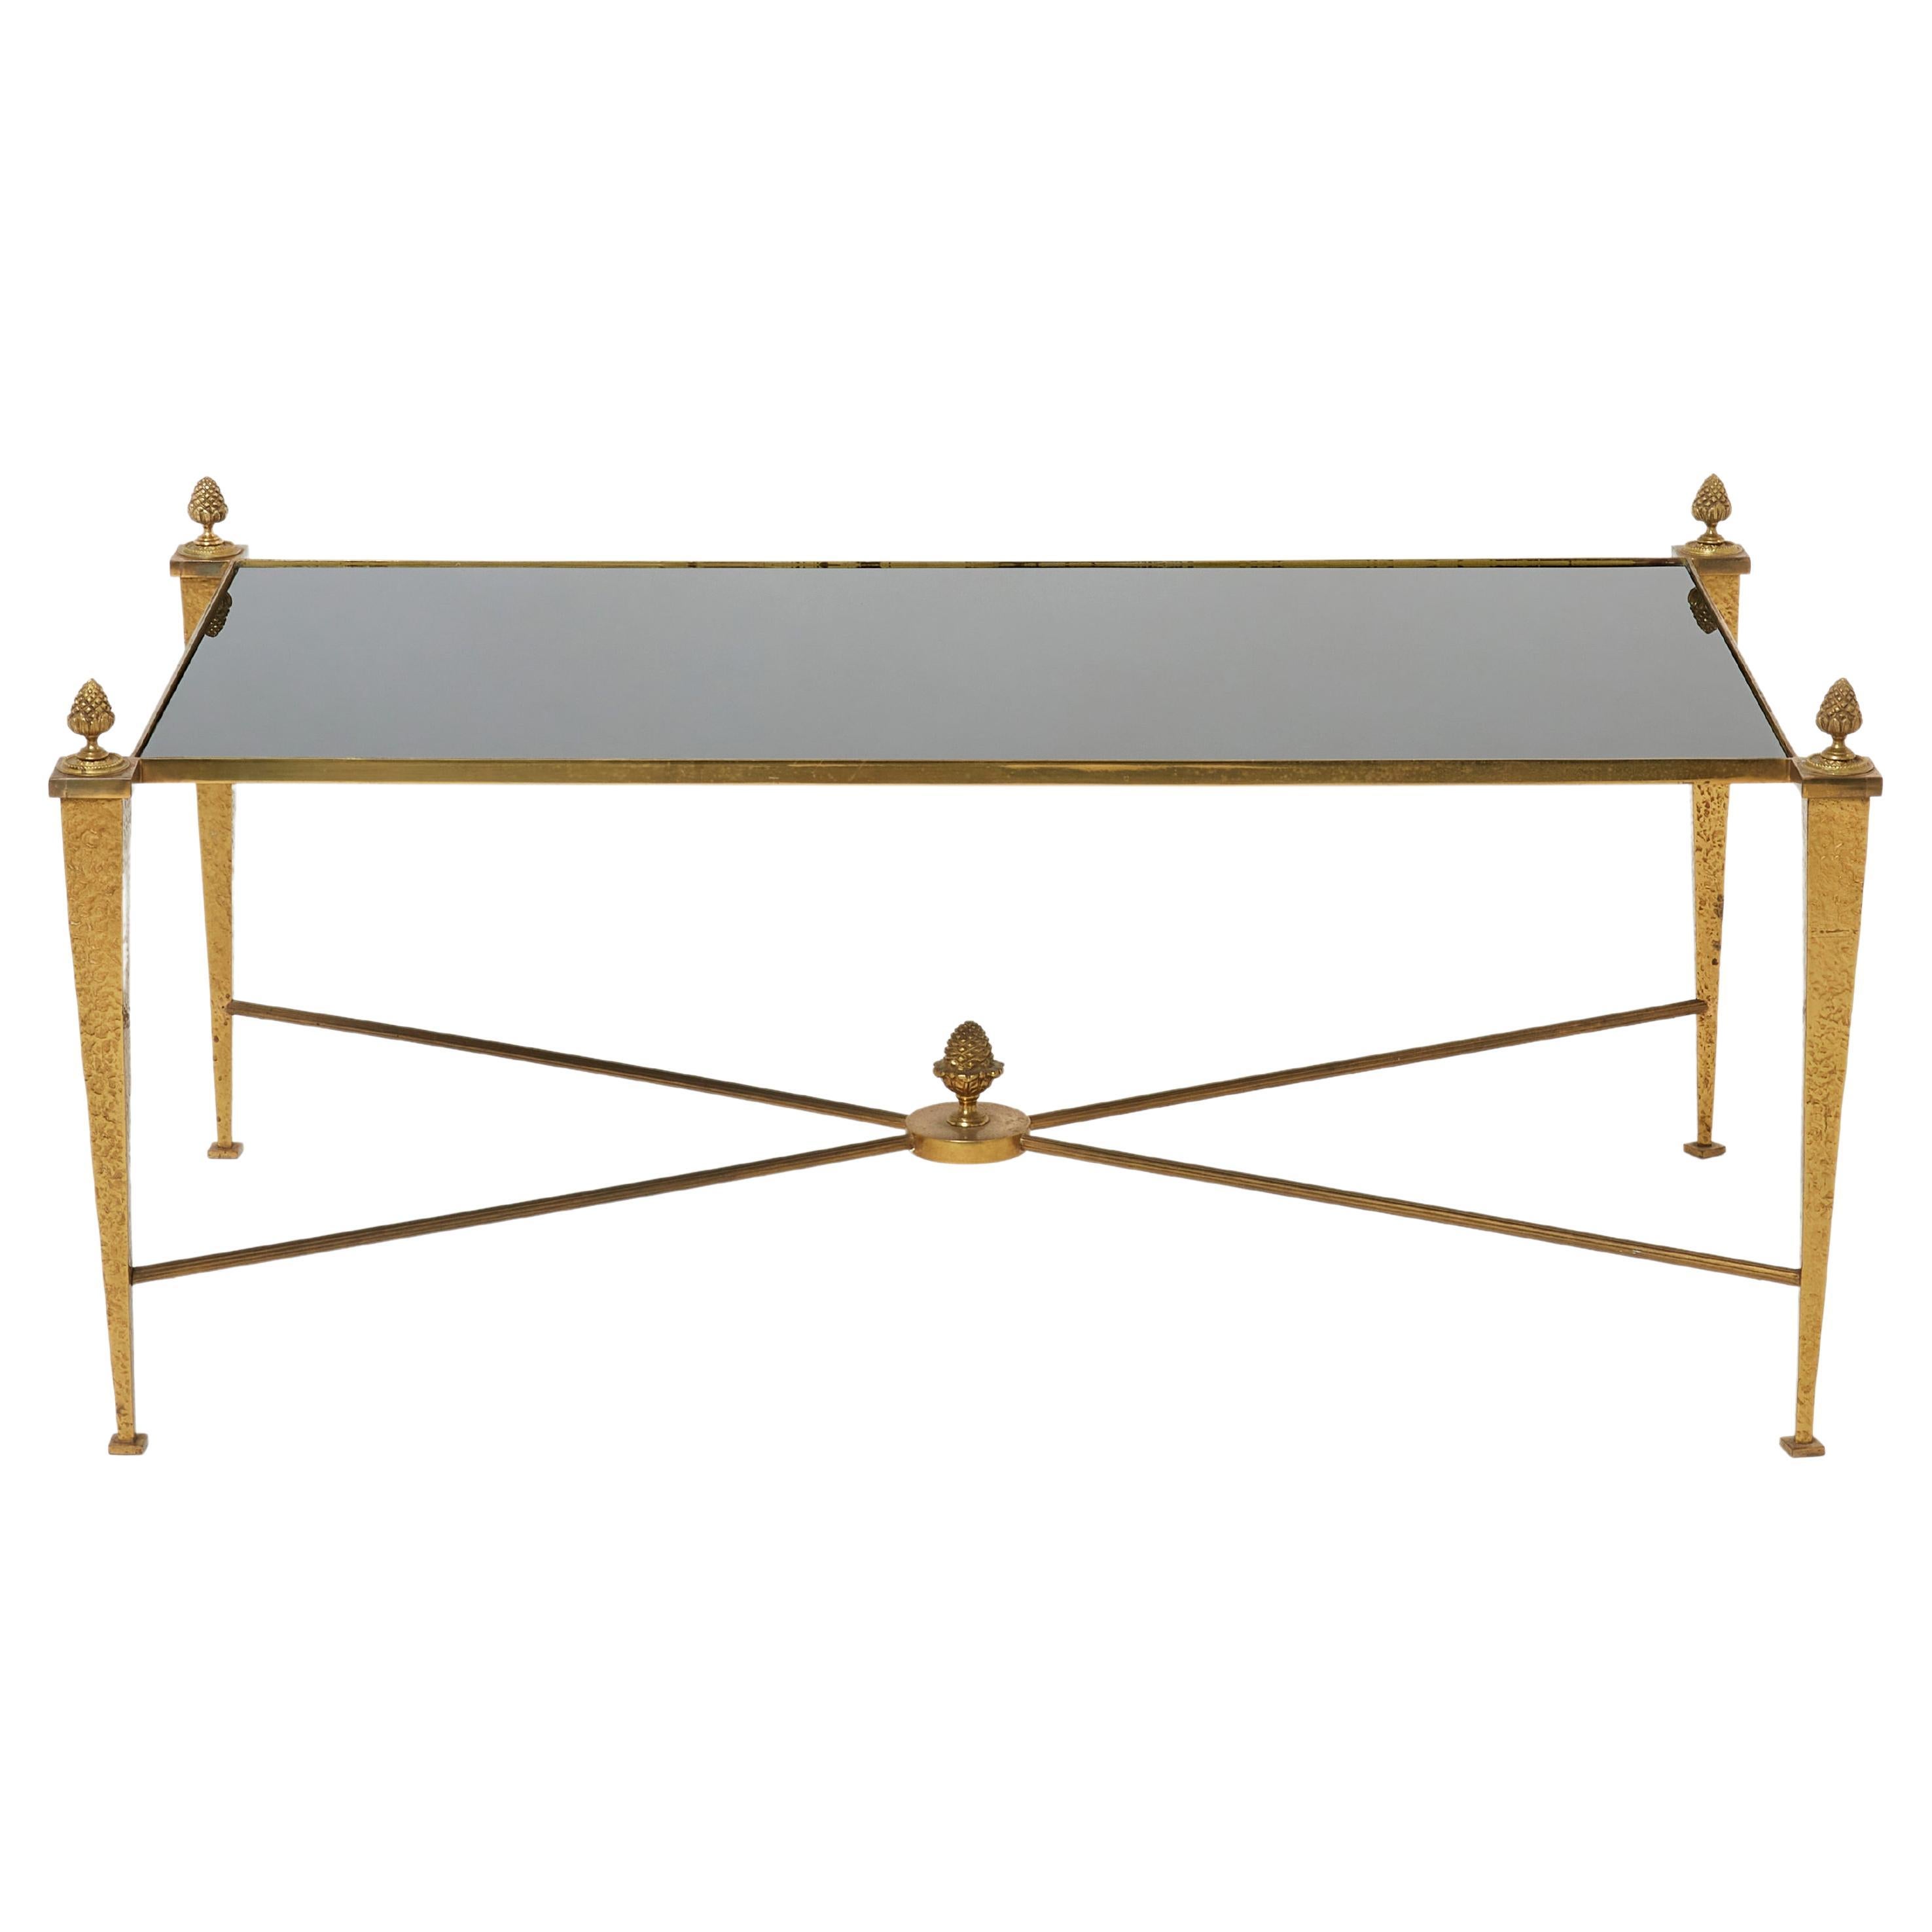 French Maison Ramsay Gilded Wrought Iron Opaline Coffee Table, 1960s